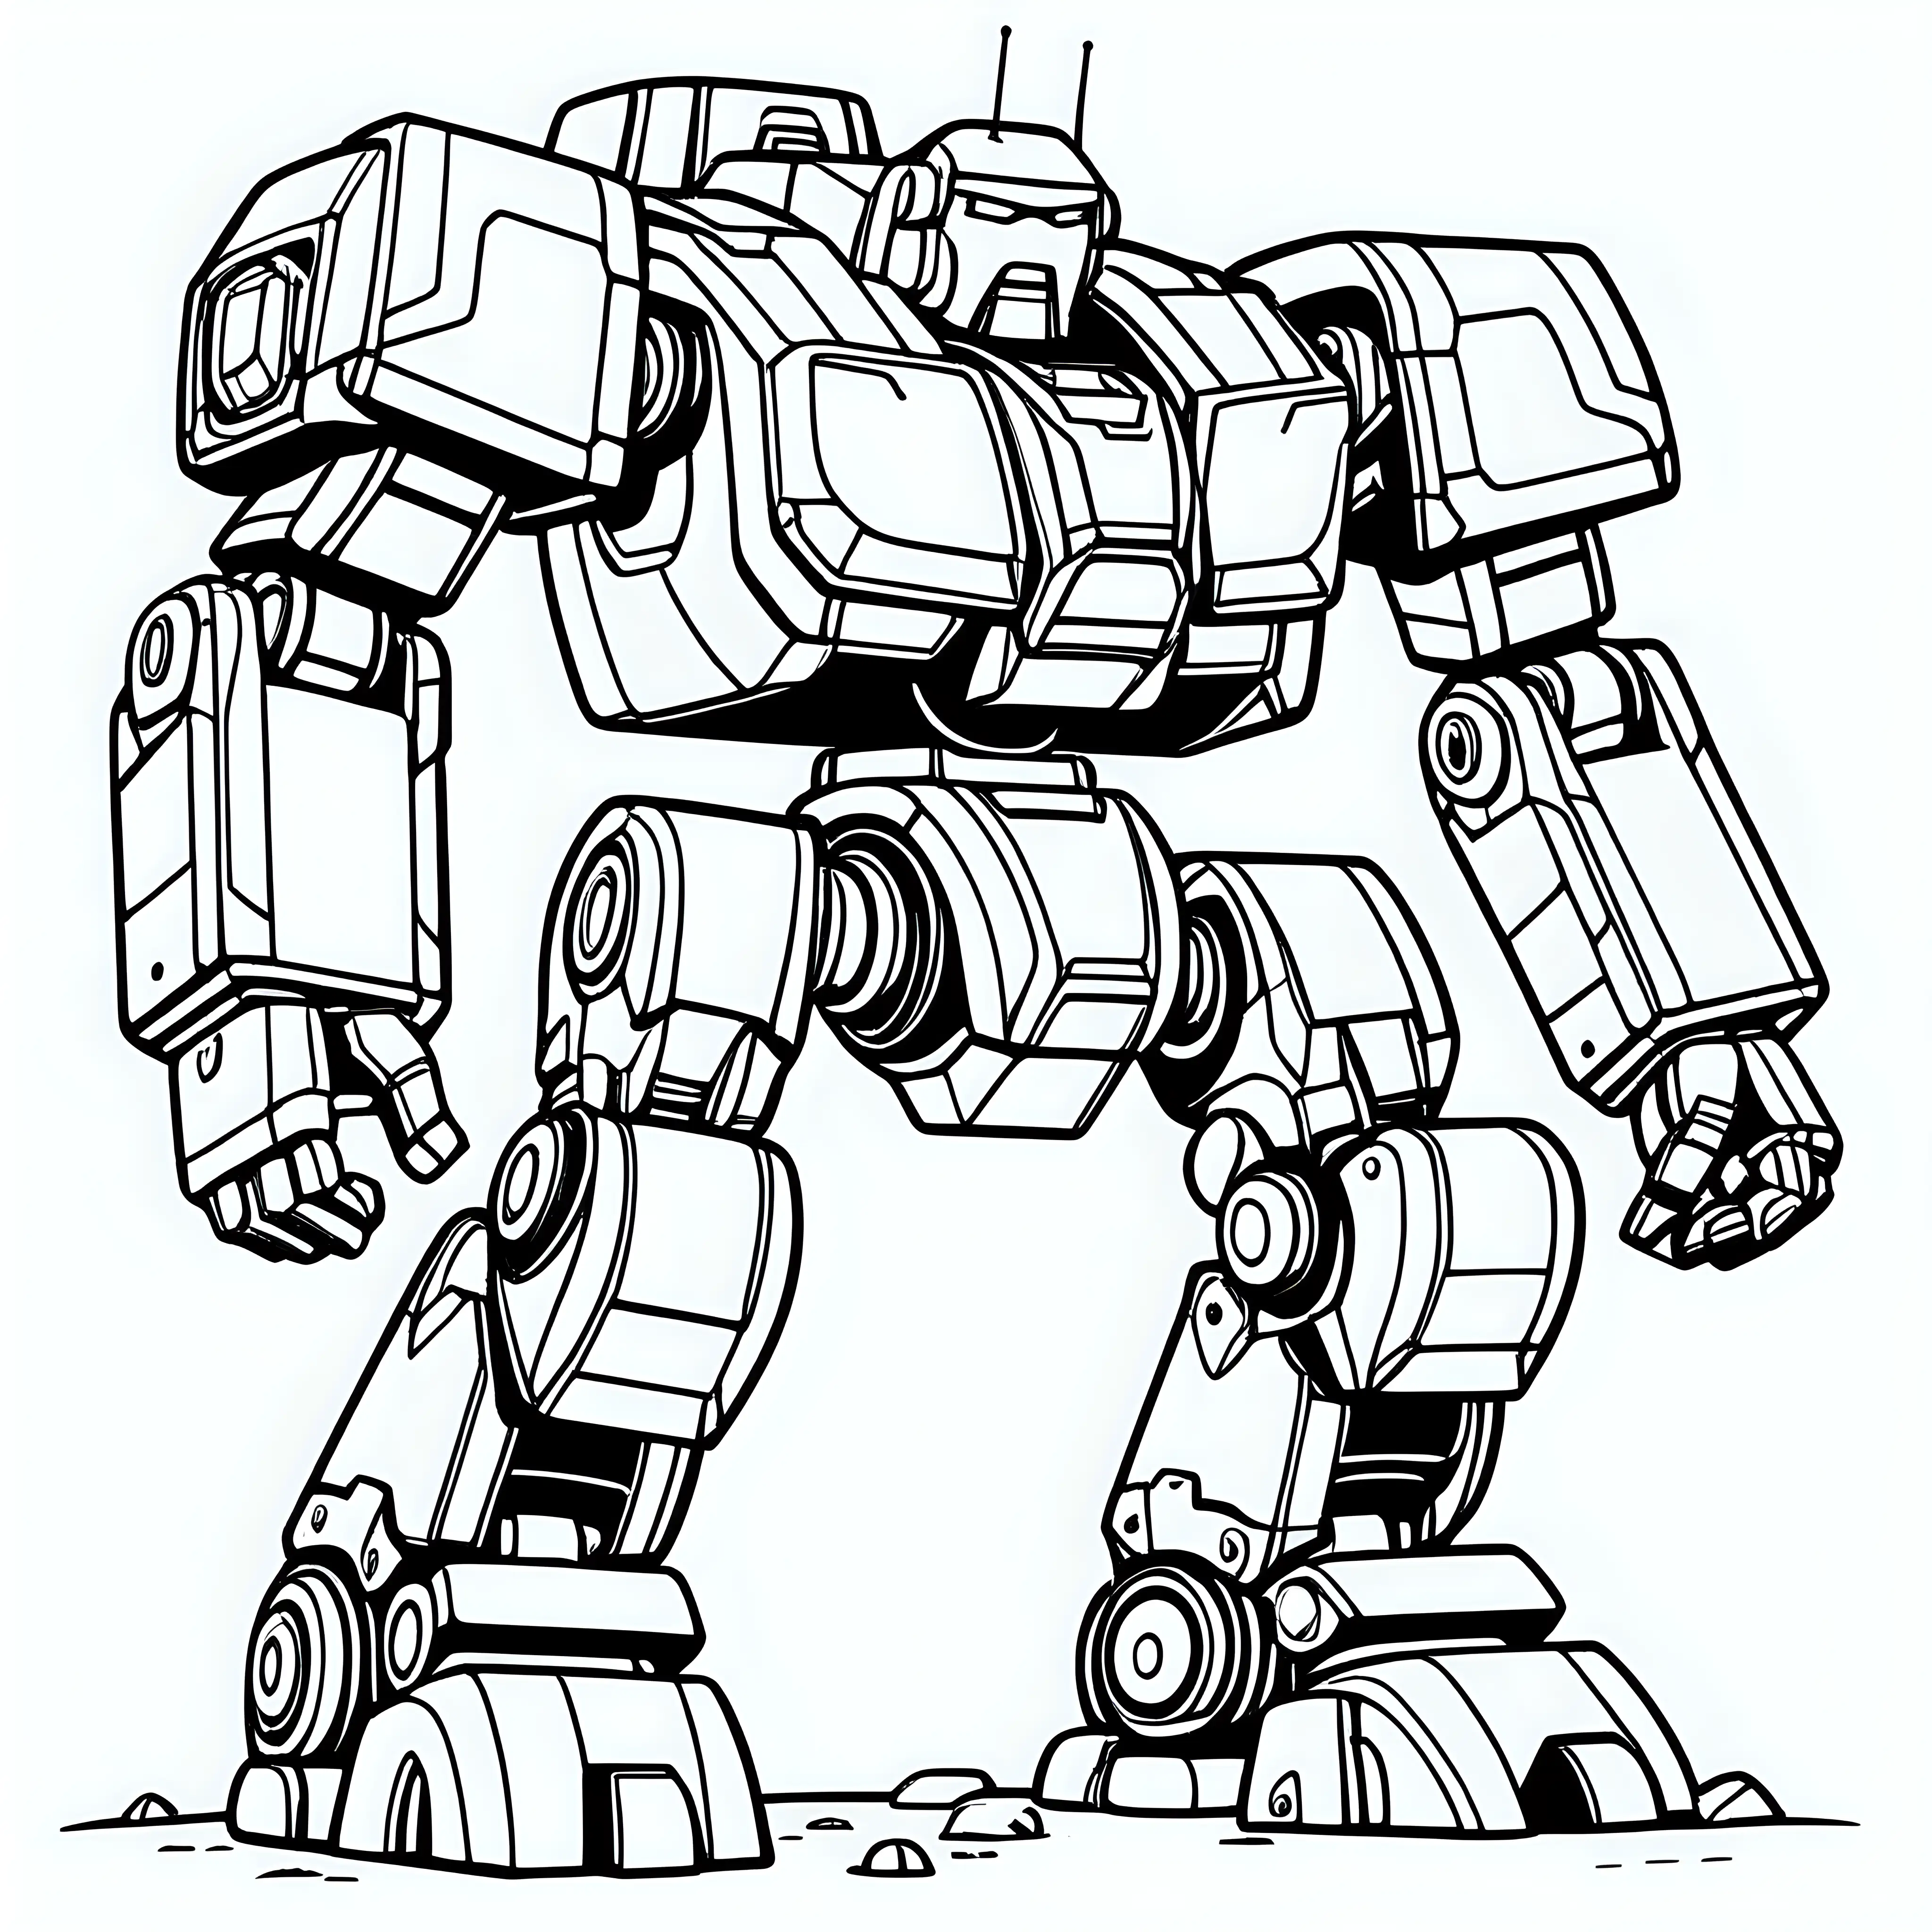 Create a chunky heavy mech, children's coloring page style , thick lines, no shading, black and white 